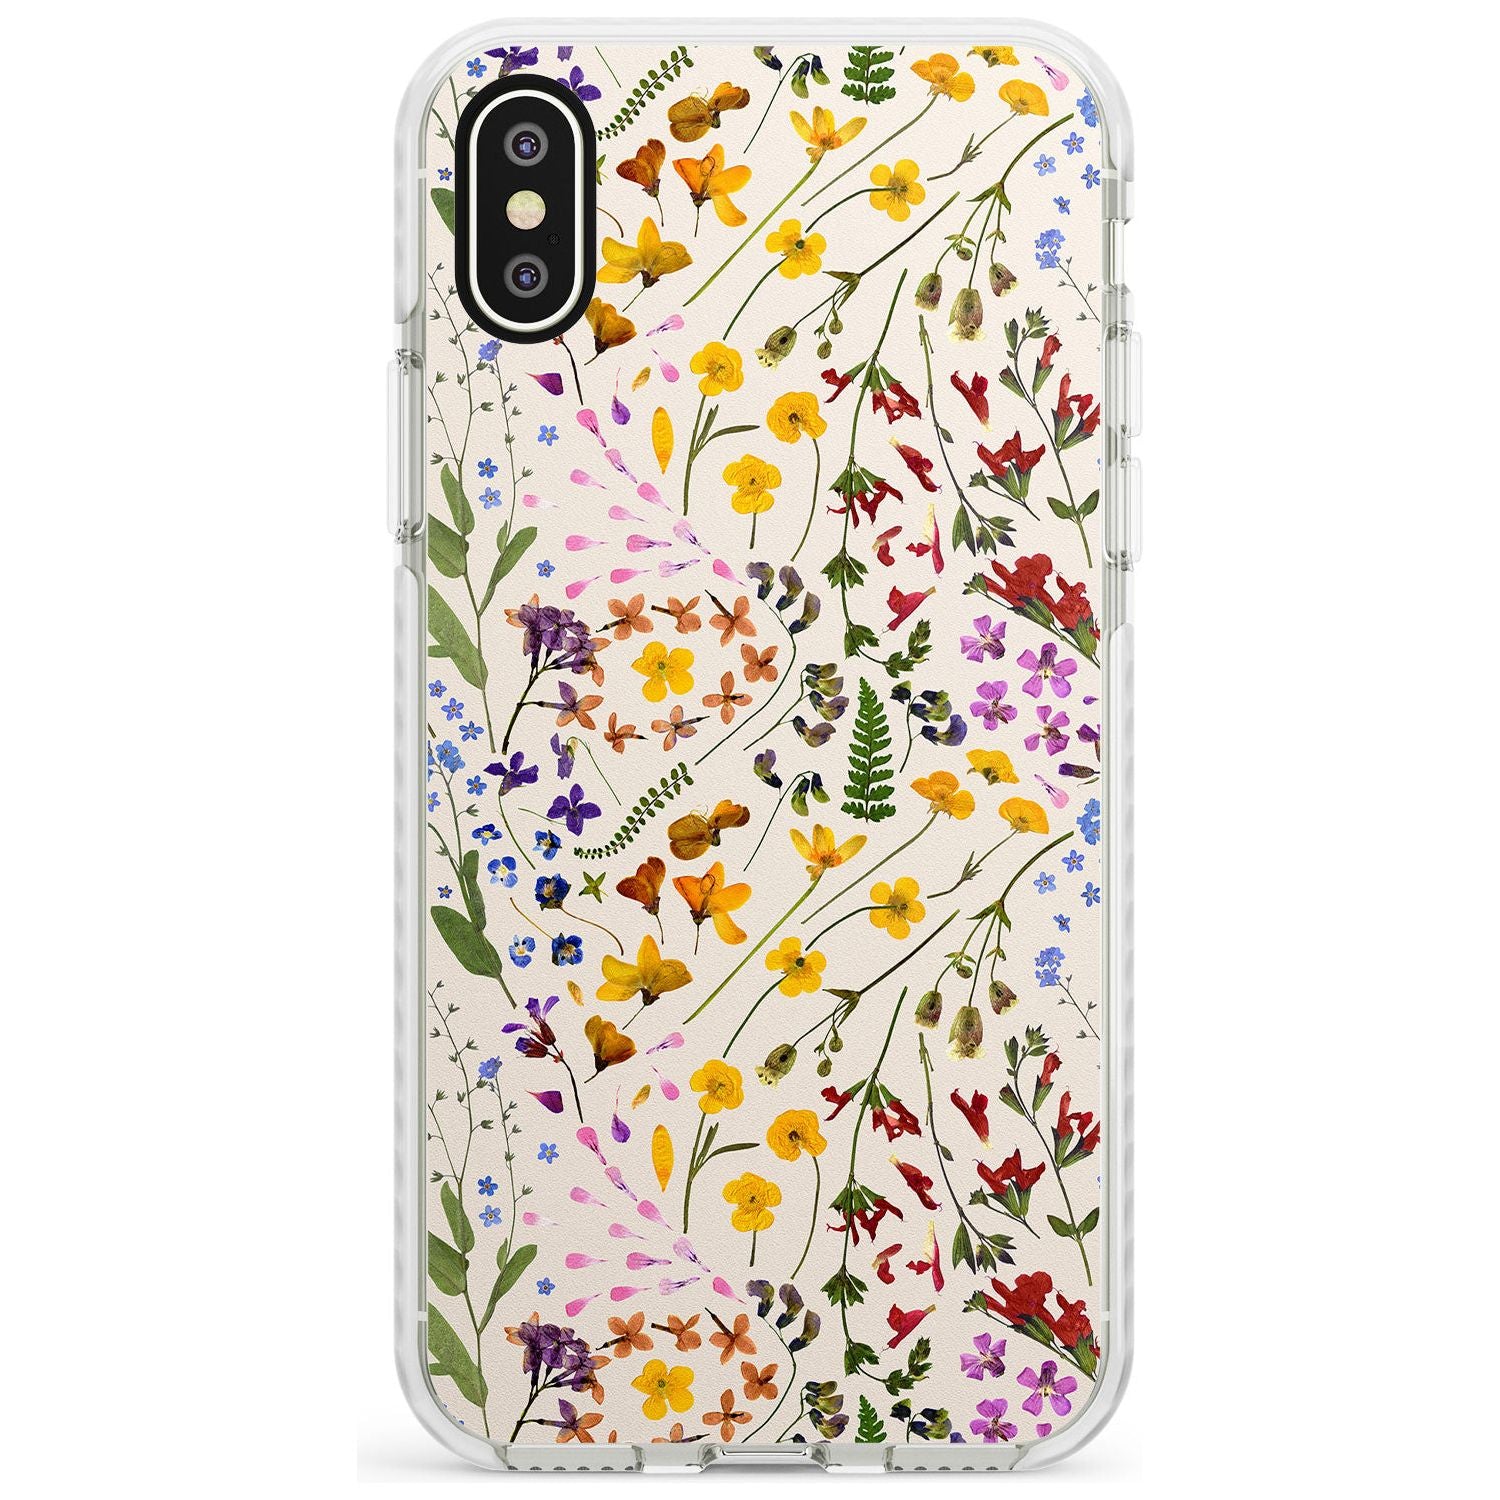 Wildflower & Leaves Cluster Design - Cream Impact Phone Case for iPhone X XS Max XR